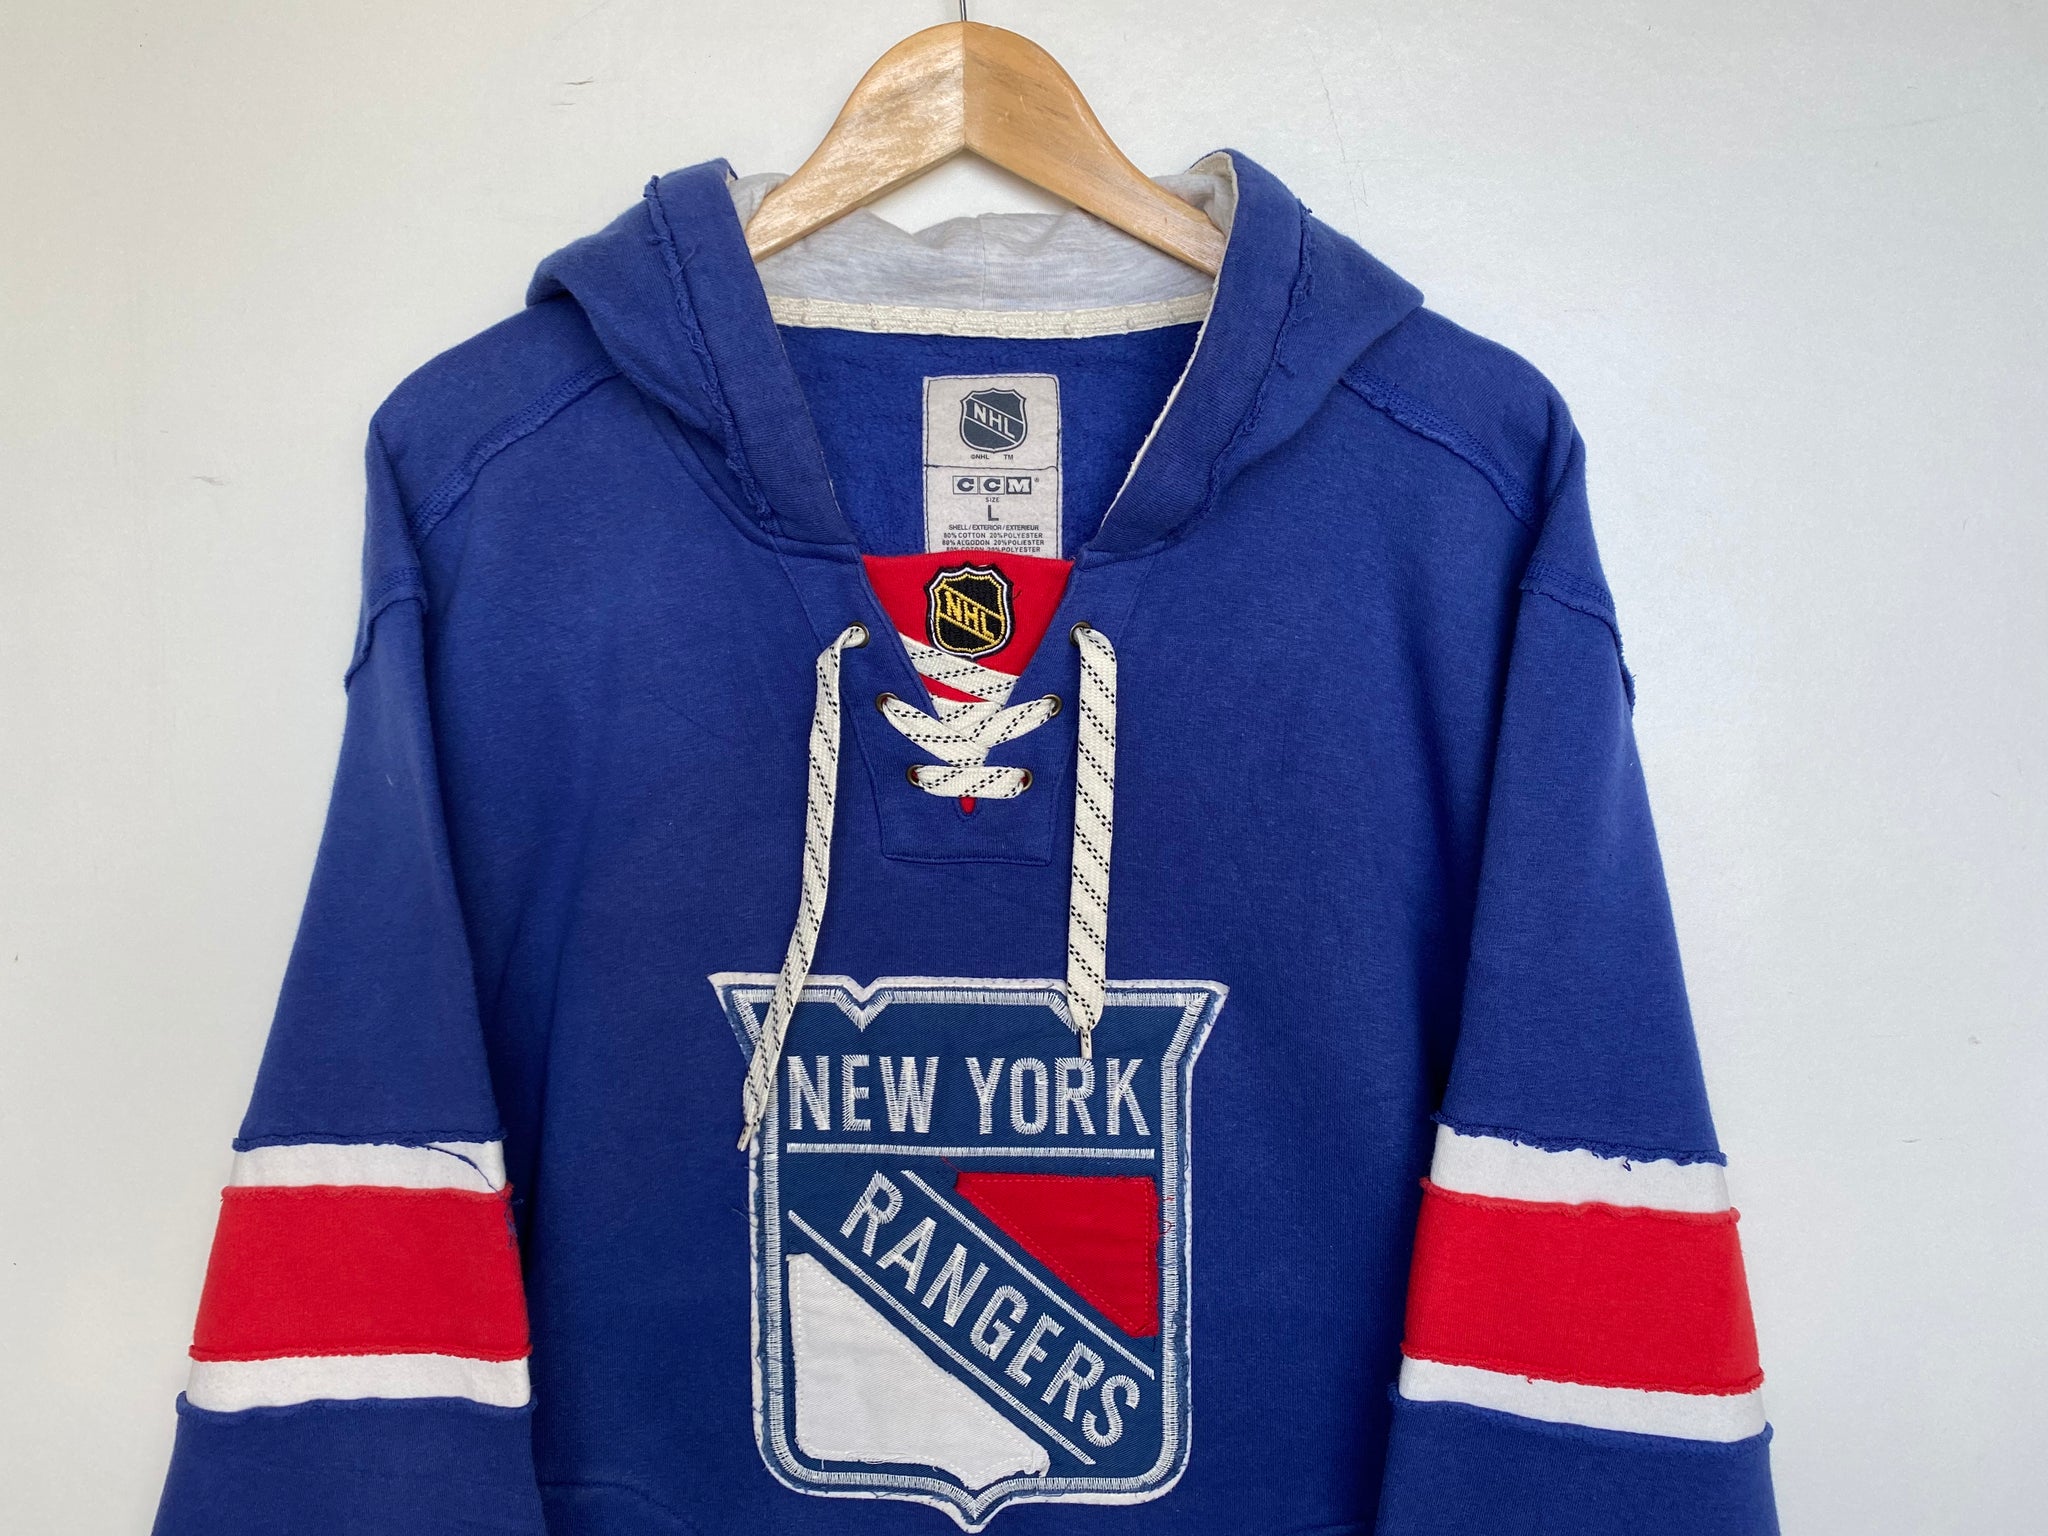 New York Rangers Liberty Blue Red Gradient Personalized NHL Hoodie - Tagotee